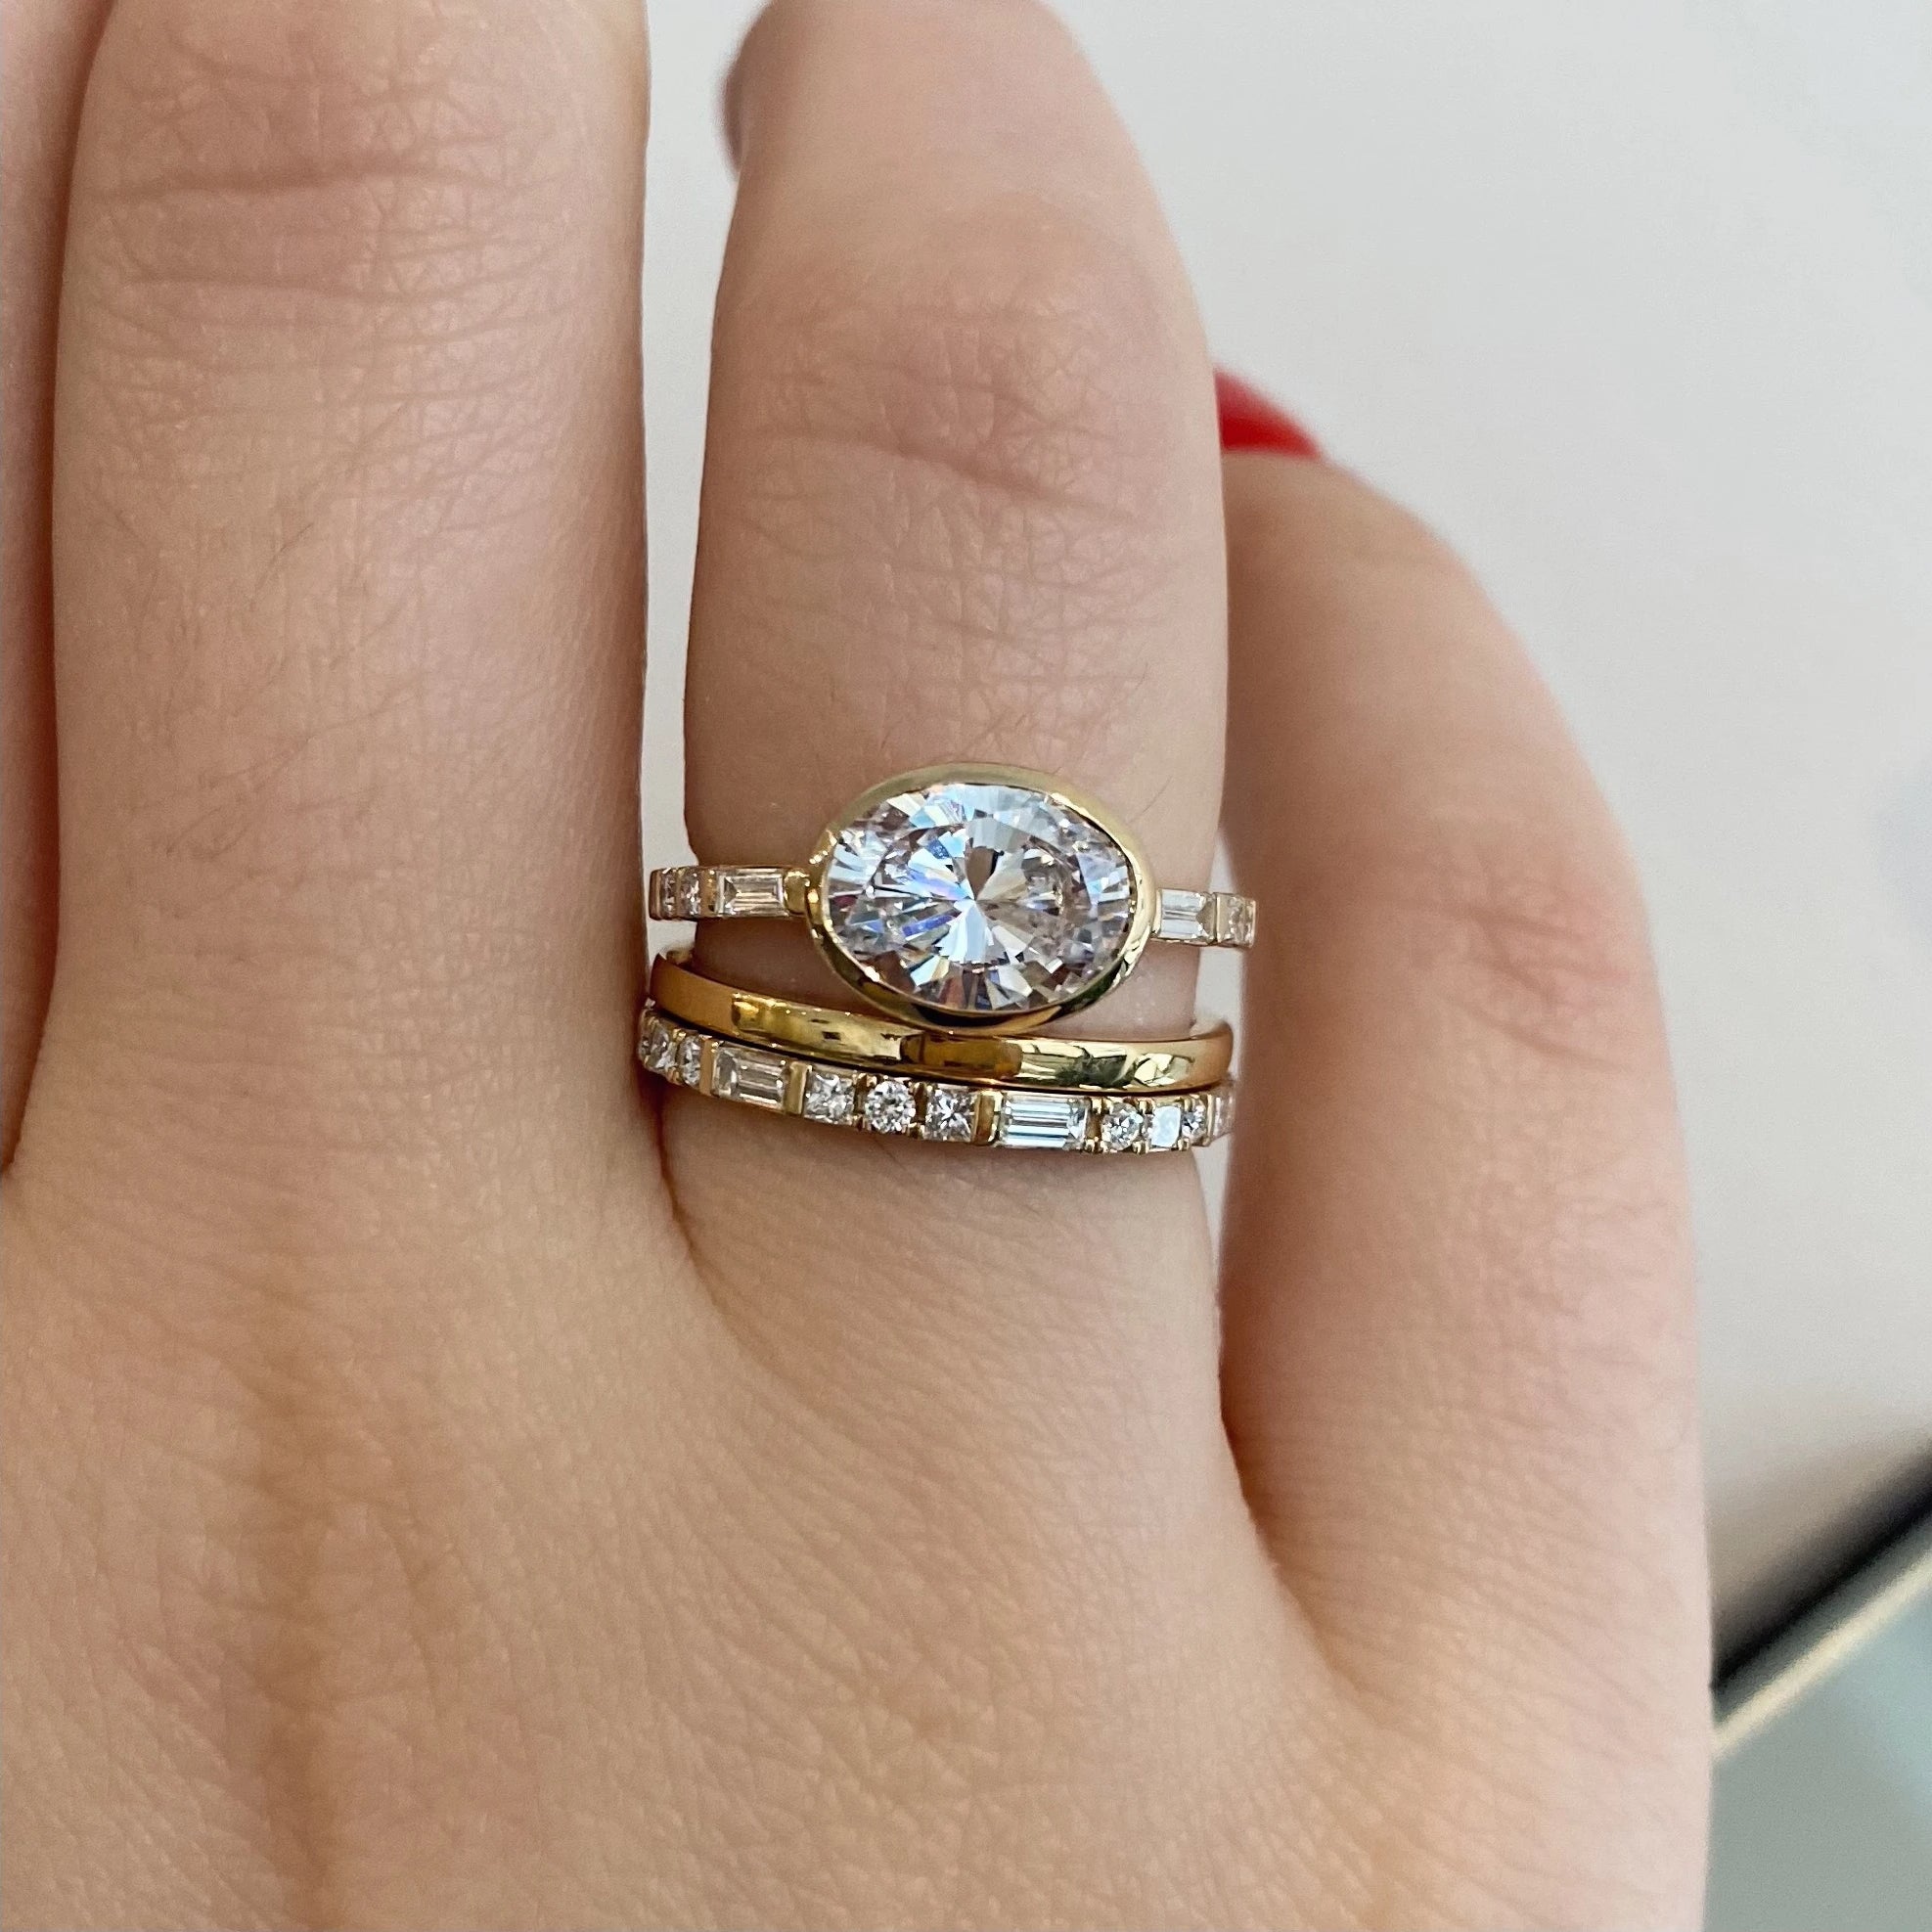 Show & Tell: Engagement Ring Spacers/Stacks !!